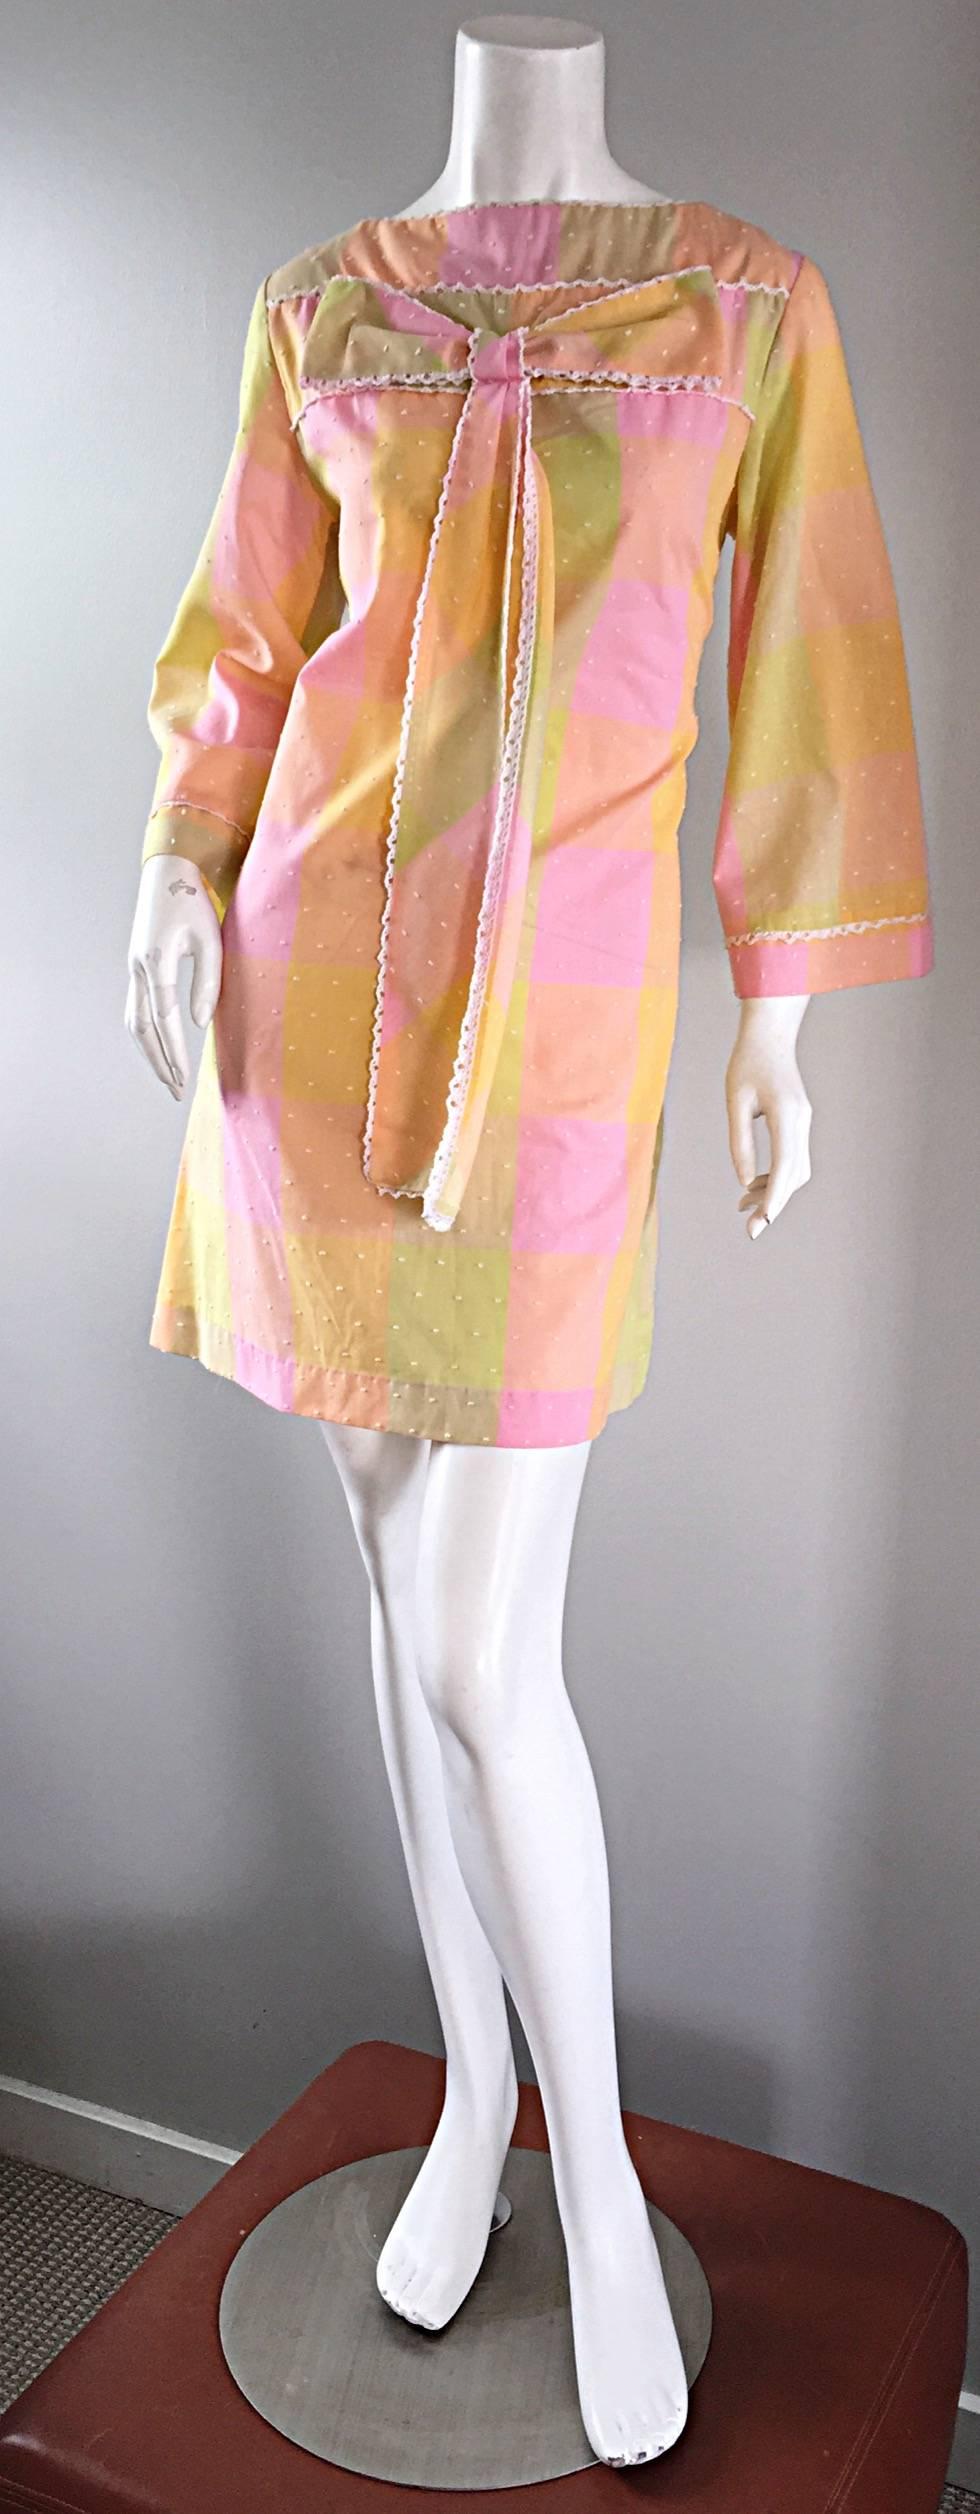 Adorable vintage 1960s soft cotton bow shift dress! Oversized plaid with pastel colors of pink, yellow, lime green, and orange, with white embroidered 'dots' throughout. Cute oversized bow at bust. White crochet scalloped edge details at bow, bust,